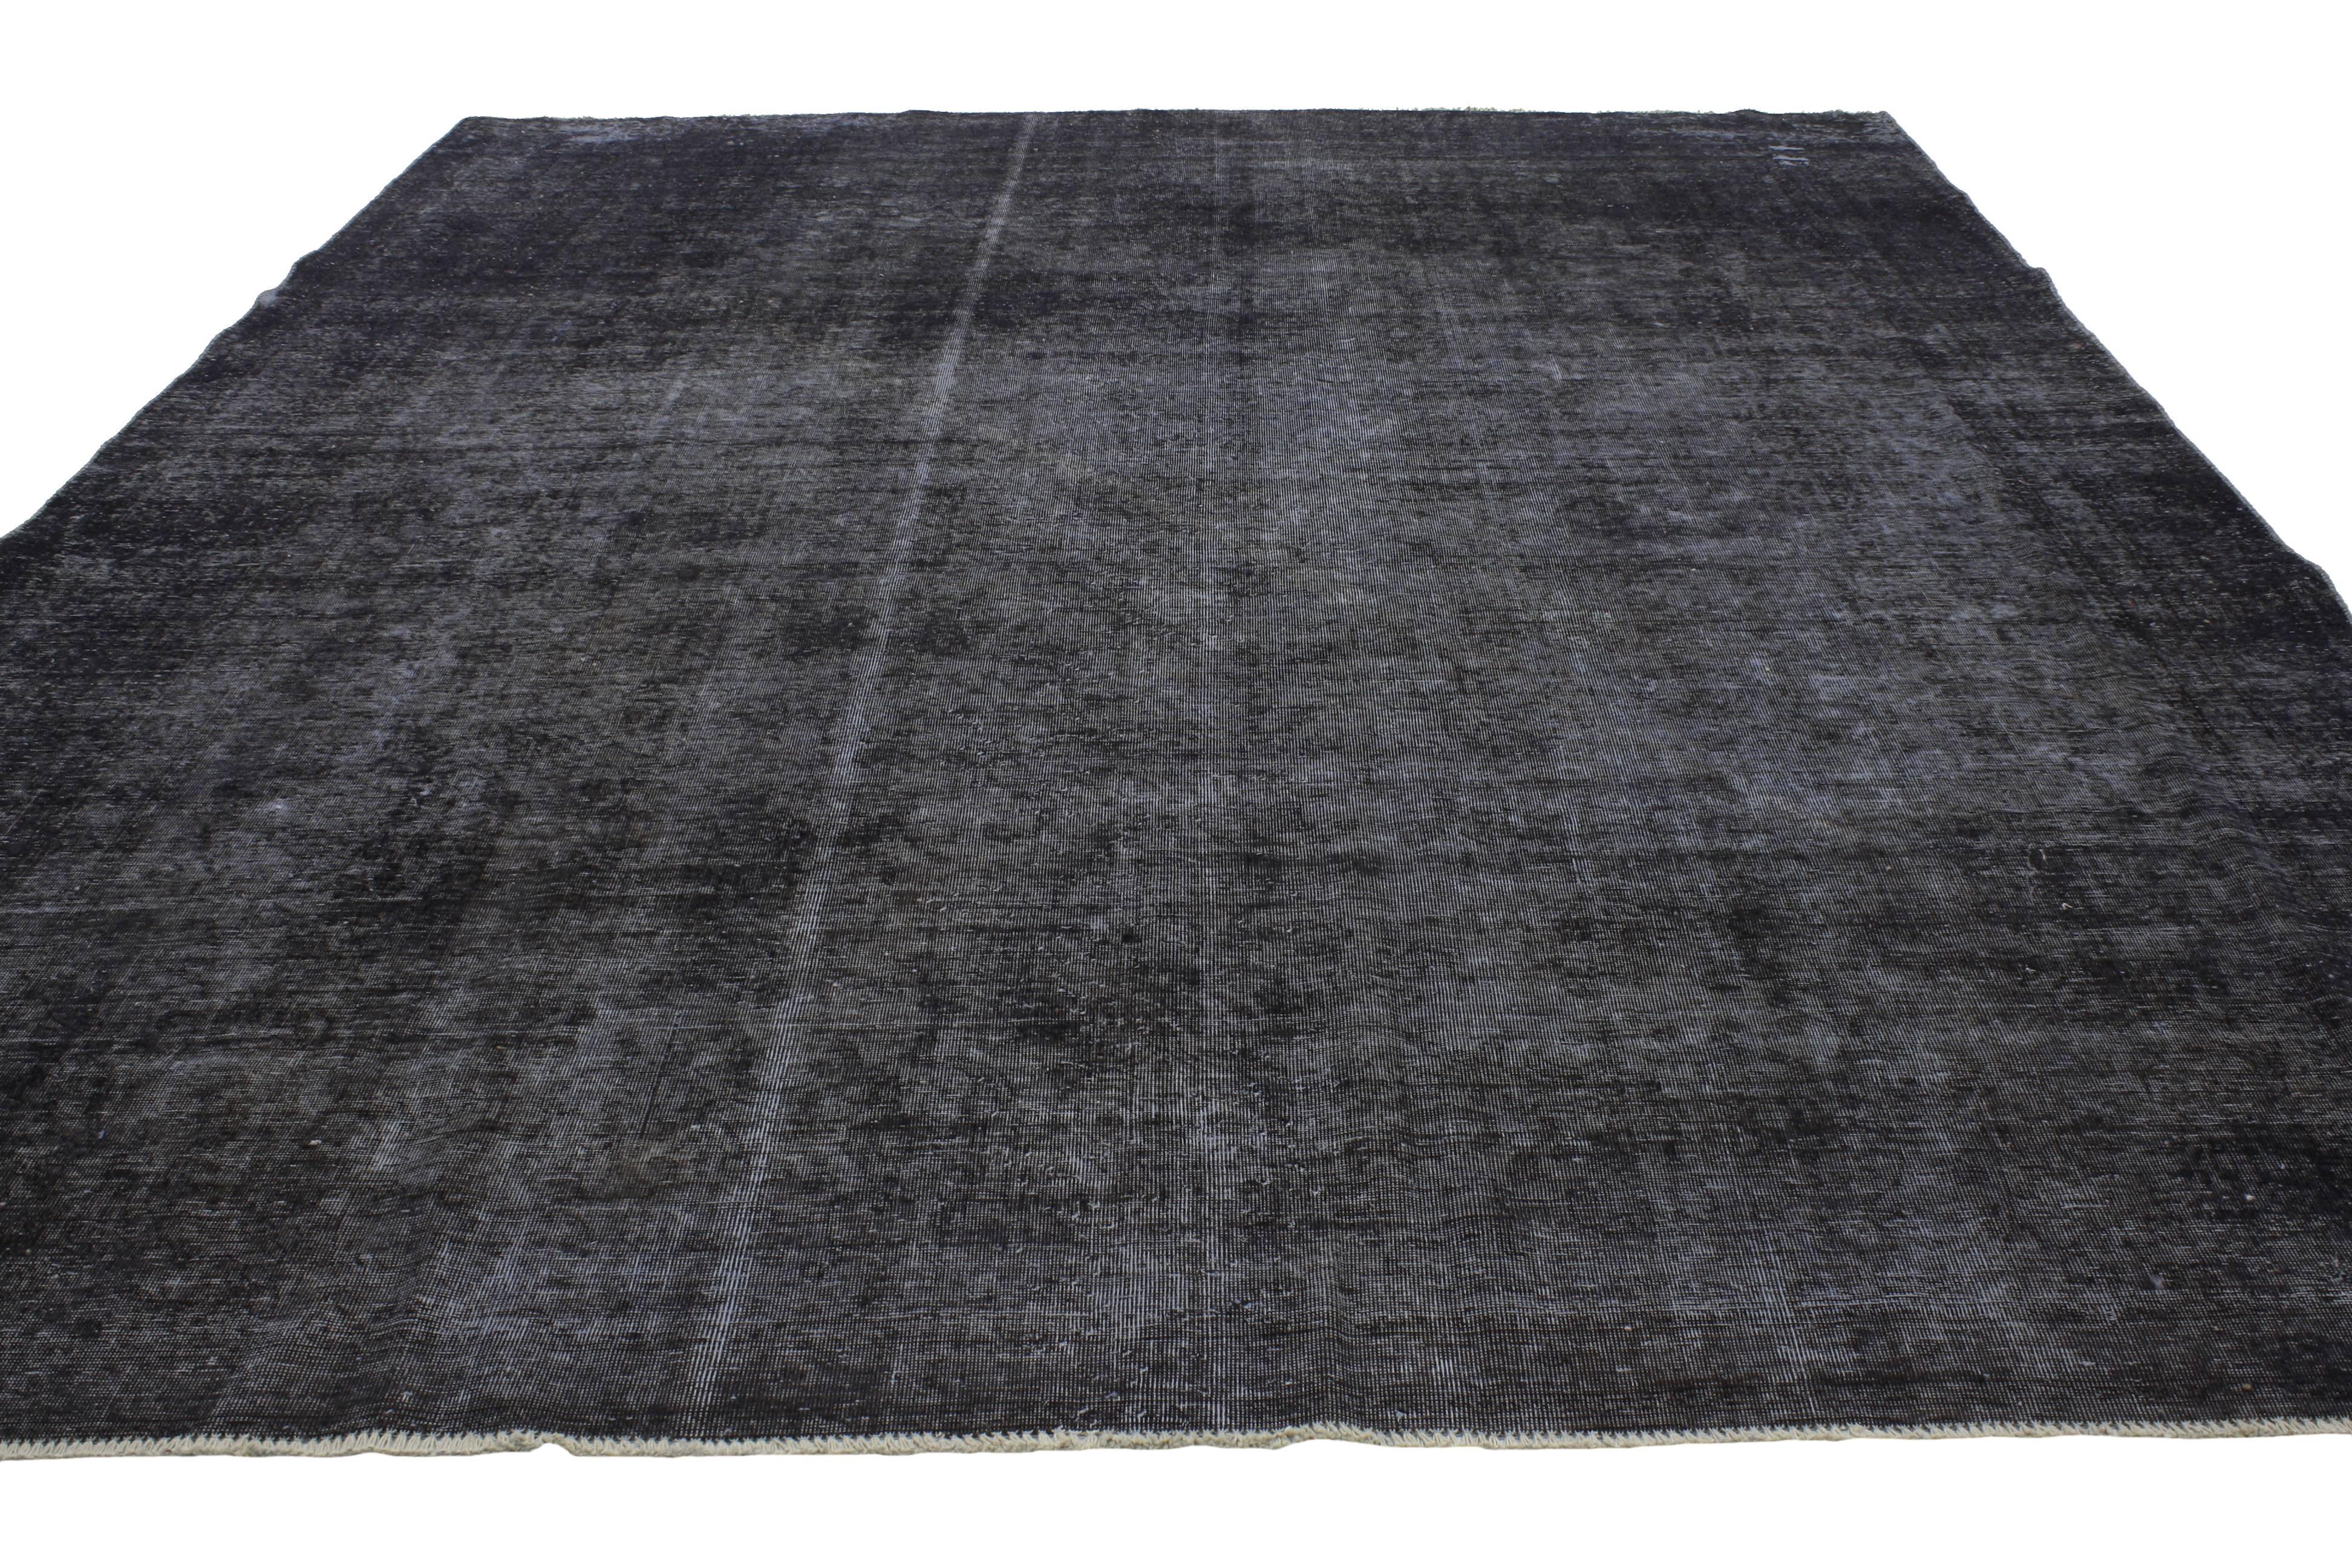 Hand-Knotted Distressed Antique Persian Charcoal Overdyed Rug with Modern Industrial Style